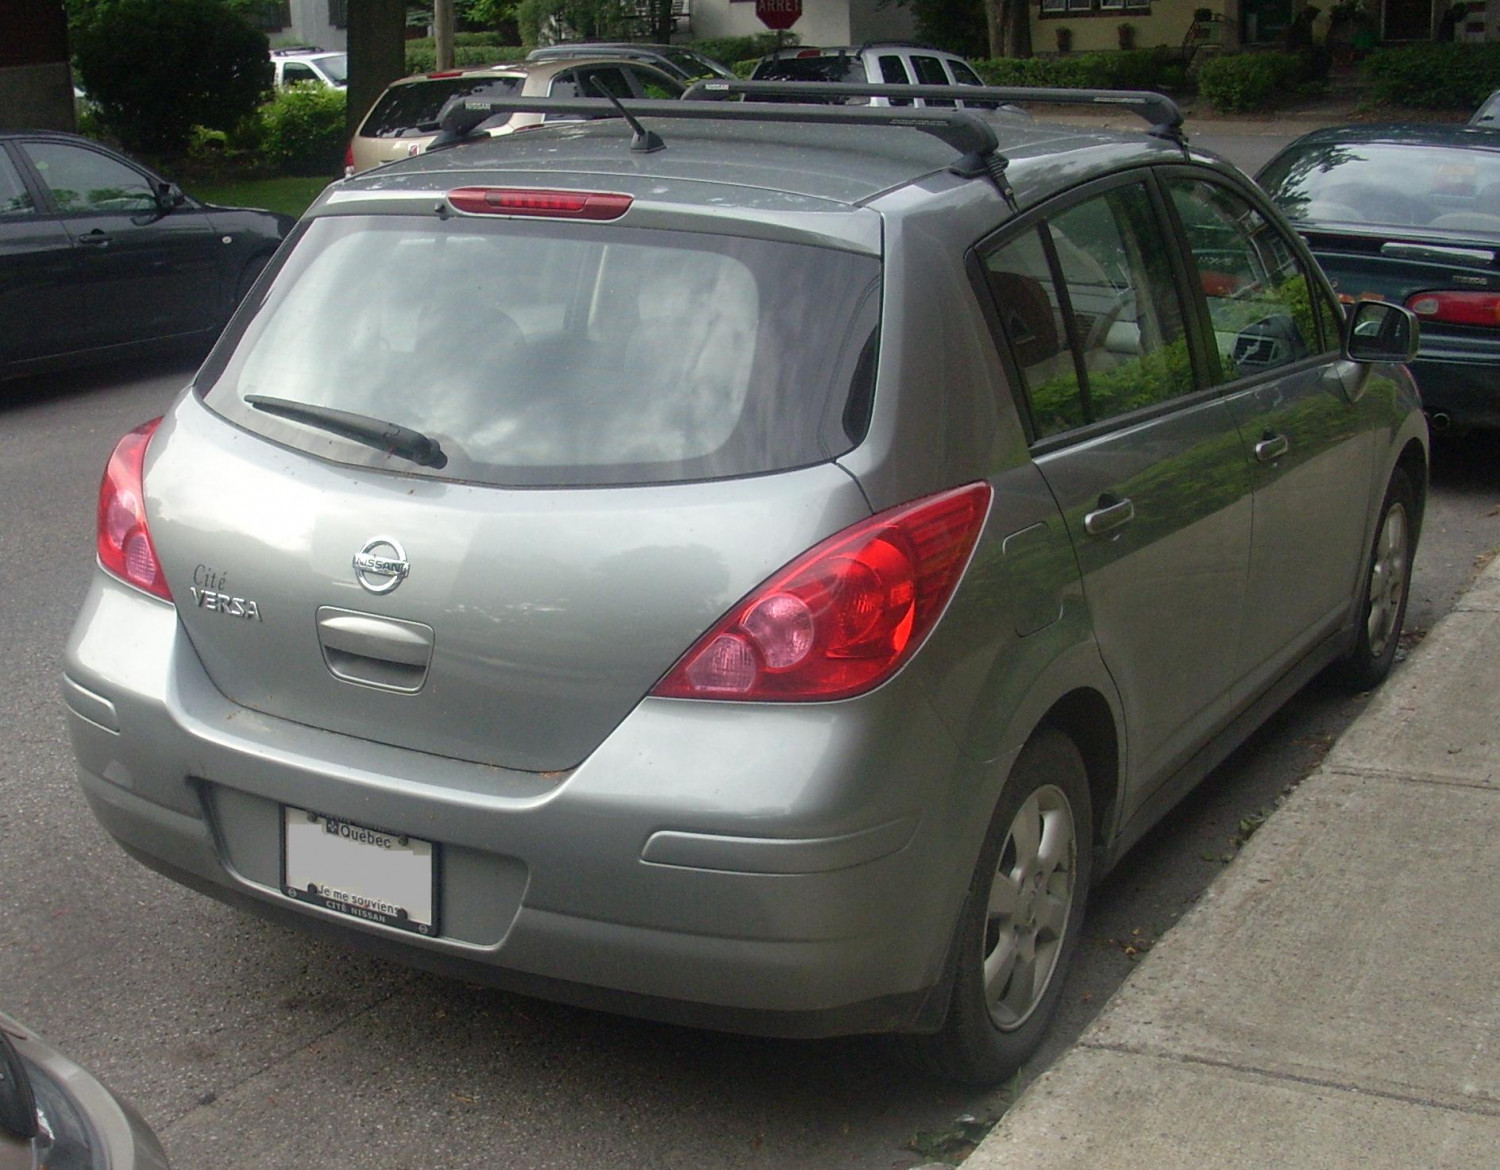 Example of a Versa 1